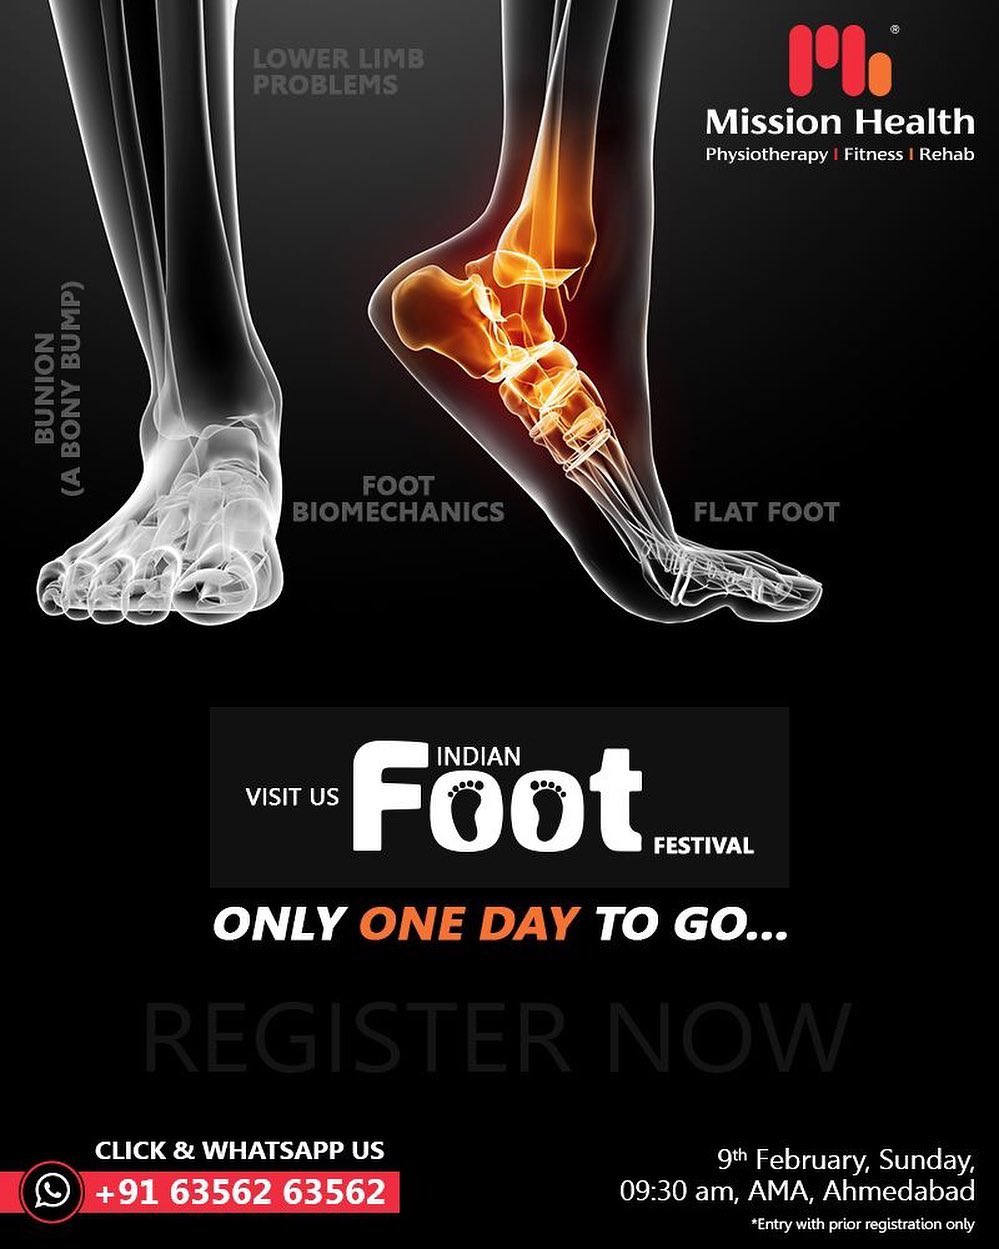 Flat FOOT l Foot Biomechanics l Lower Limb Problems l  Bunion (A Bony Bump) & other foot problems

Seats are booked for tomorrow's session. We wholeheartedly welcome all the registered participants for one of its kind experience ever... Only ONE Day to GO… 
Call: +916356263562
Visit: www.missionhealth.co.in

#IndianFootFestival #ComingSoon #FootClinic #footpain #footcare #foothealth #heelpain #anklepain #flatfeet #painrelief #healthyfeet #happyfeet #MissionHealth #MissionHealthIndia #MovementIsLife